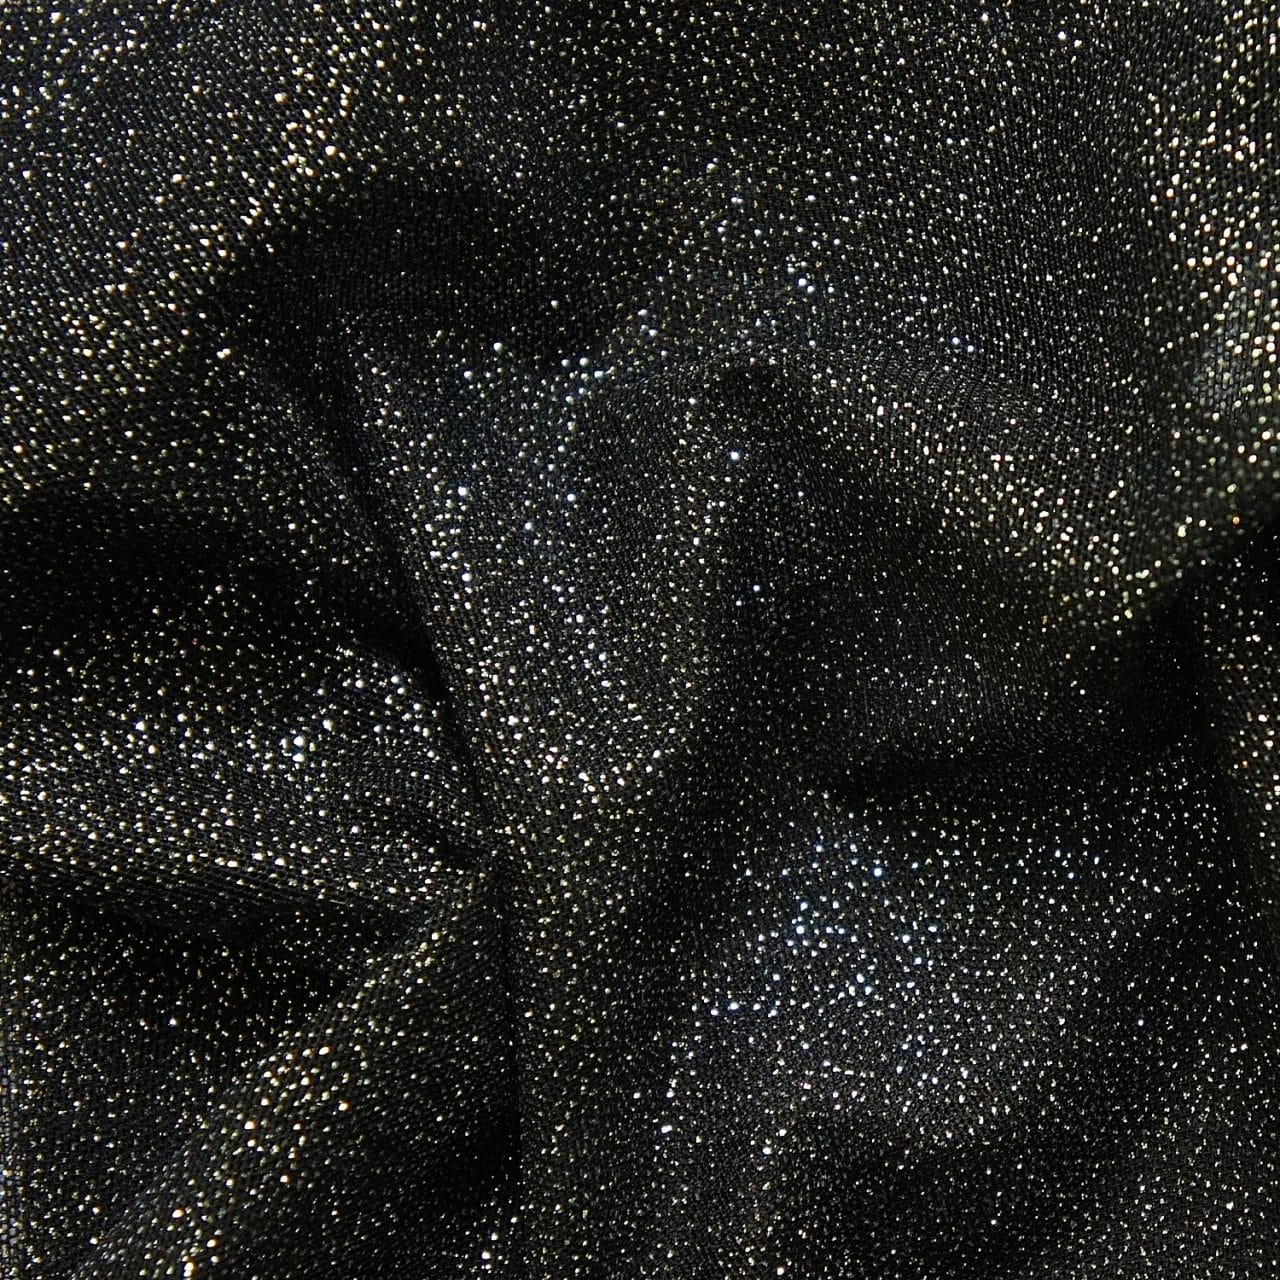 Bristol Glitter Sequin Embroidered Mesh Fabric. Lace Netting Material